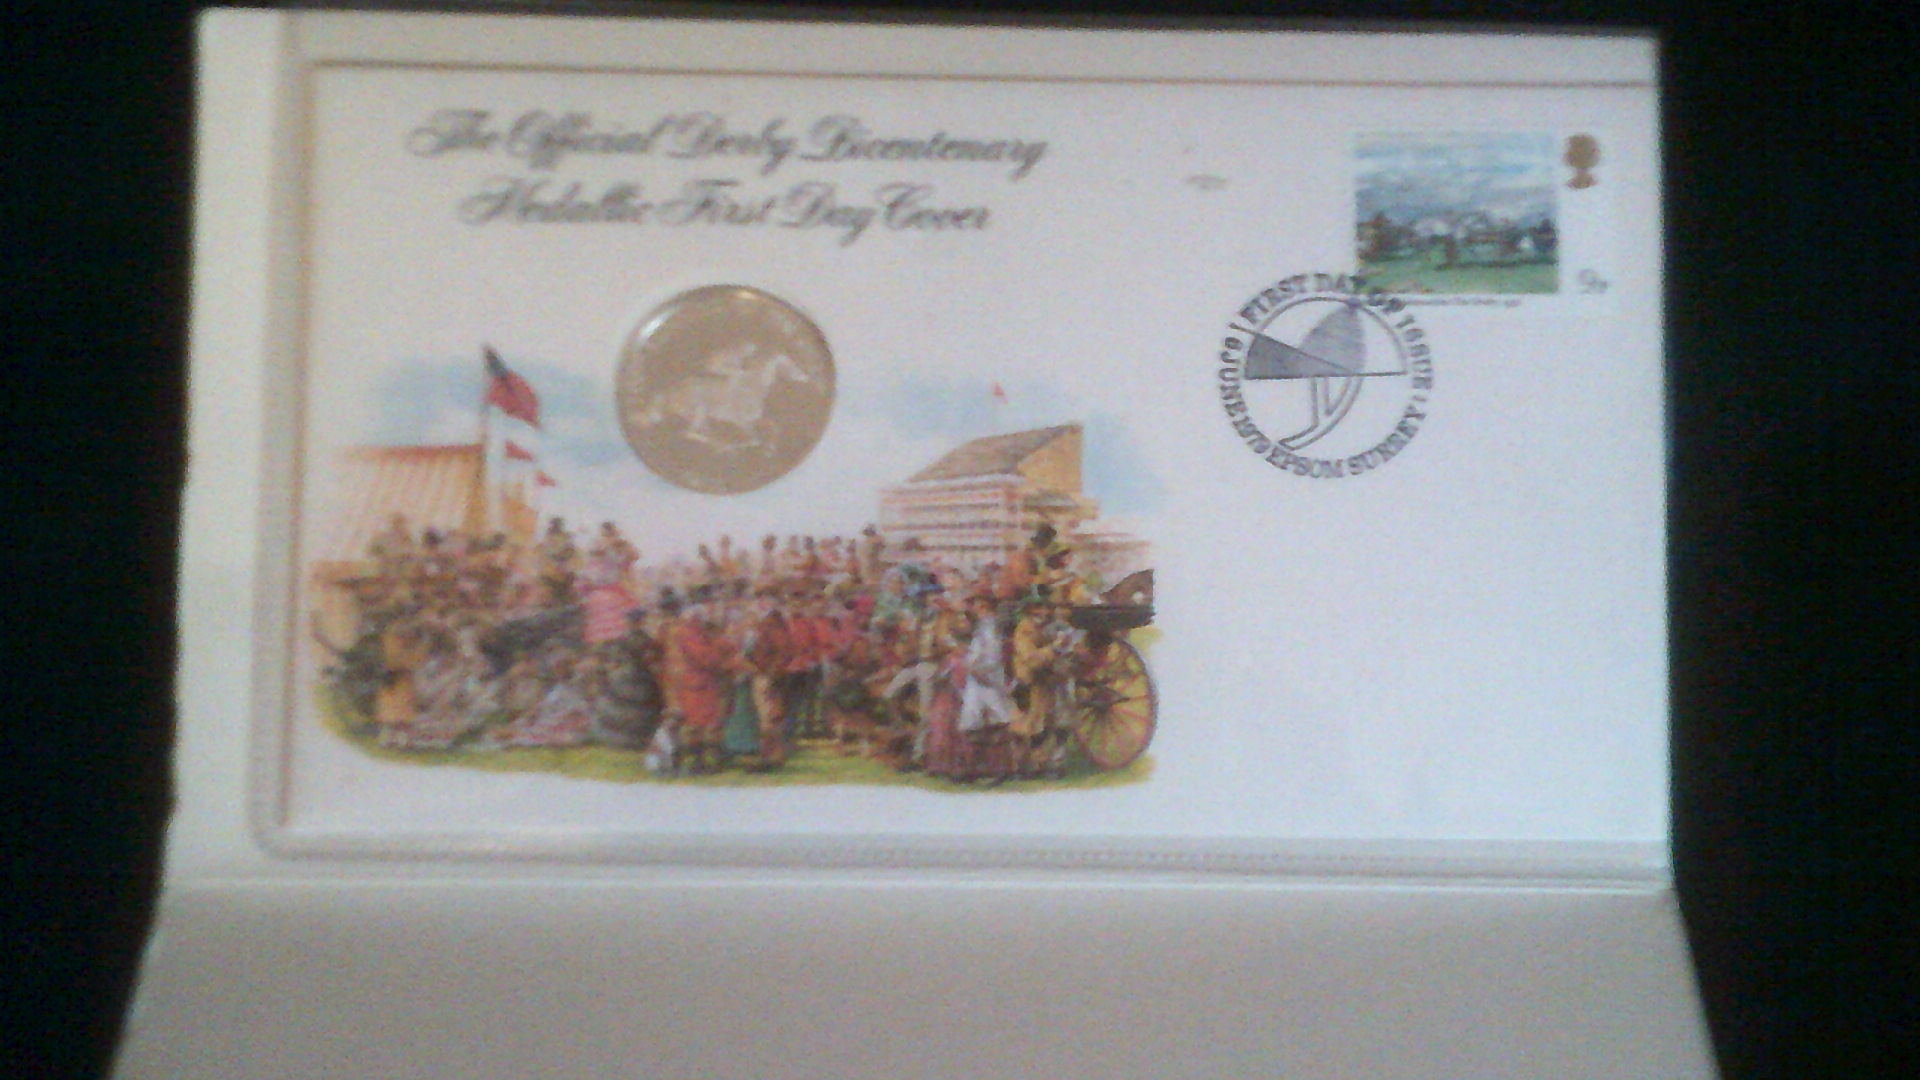 Medallion-1979-sterling silver medallion Derby Day Bicentenary Official First Day Cover, Epson,